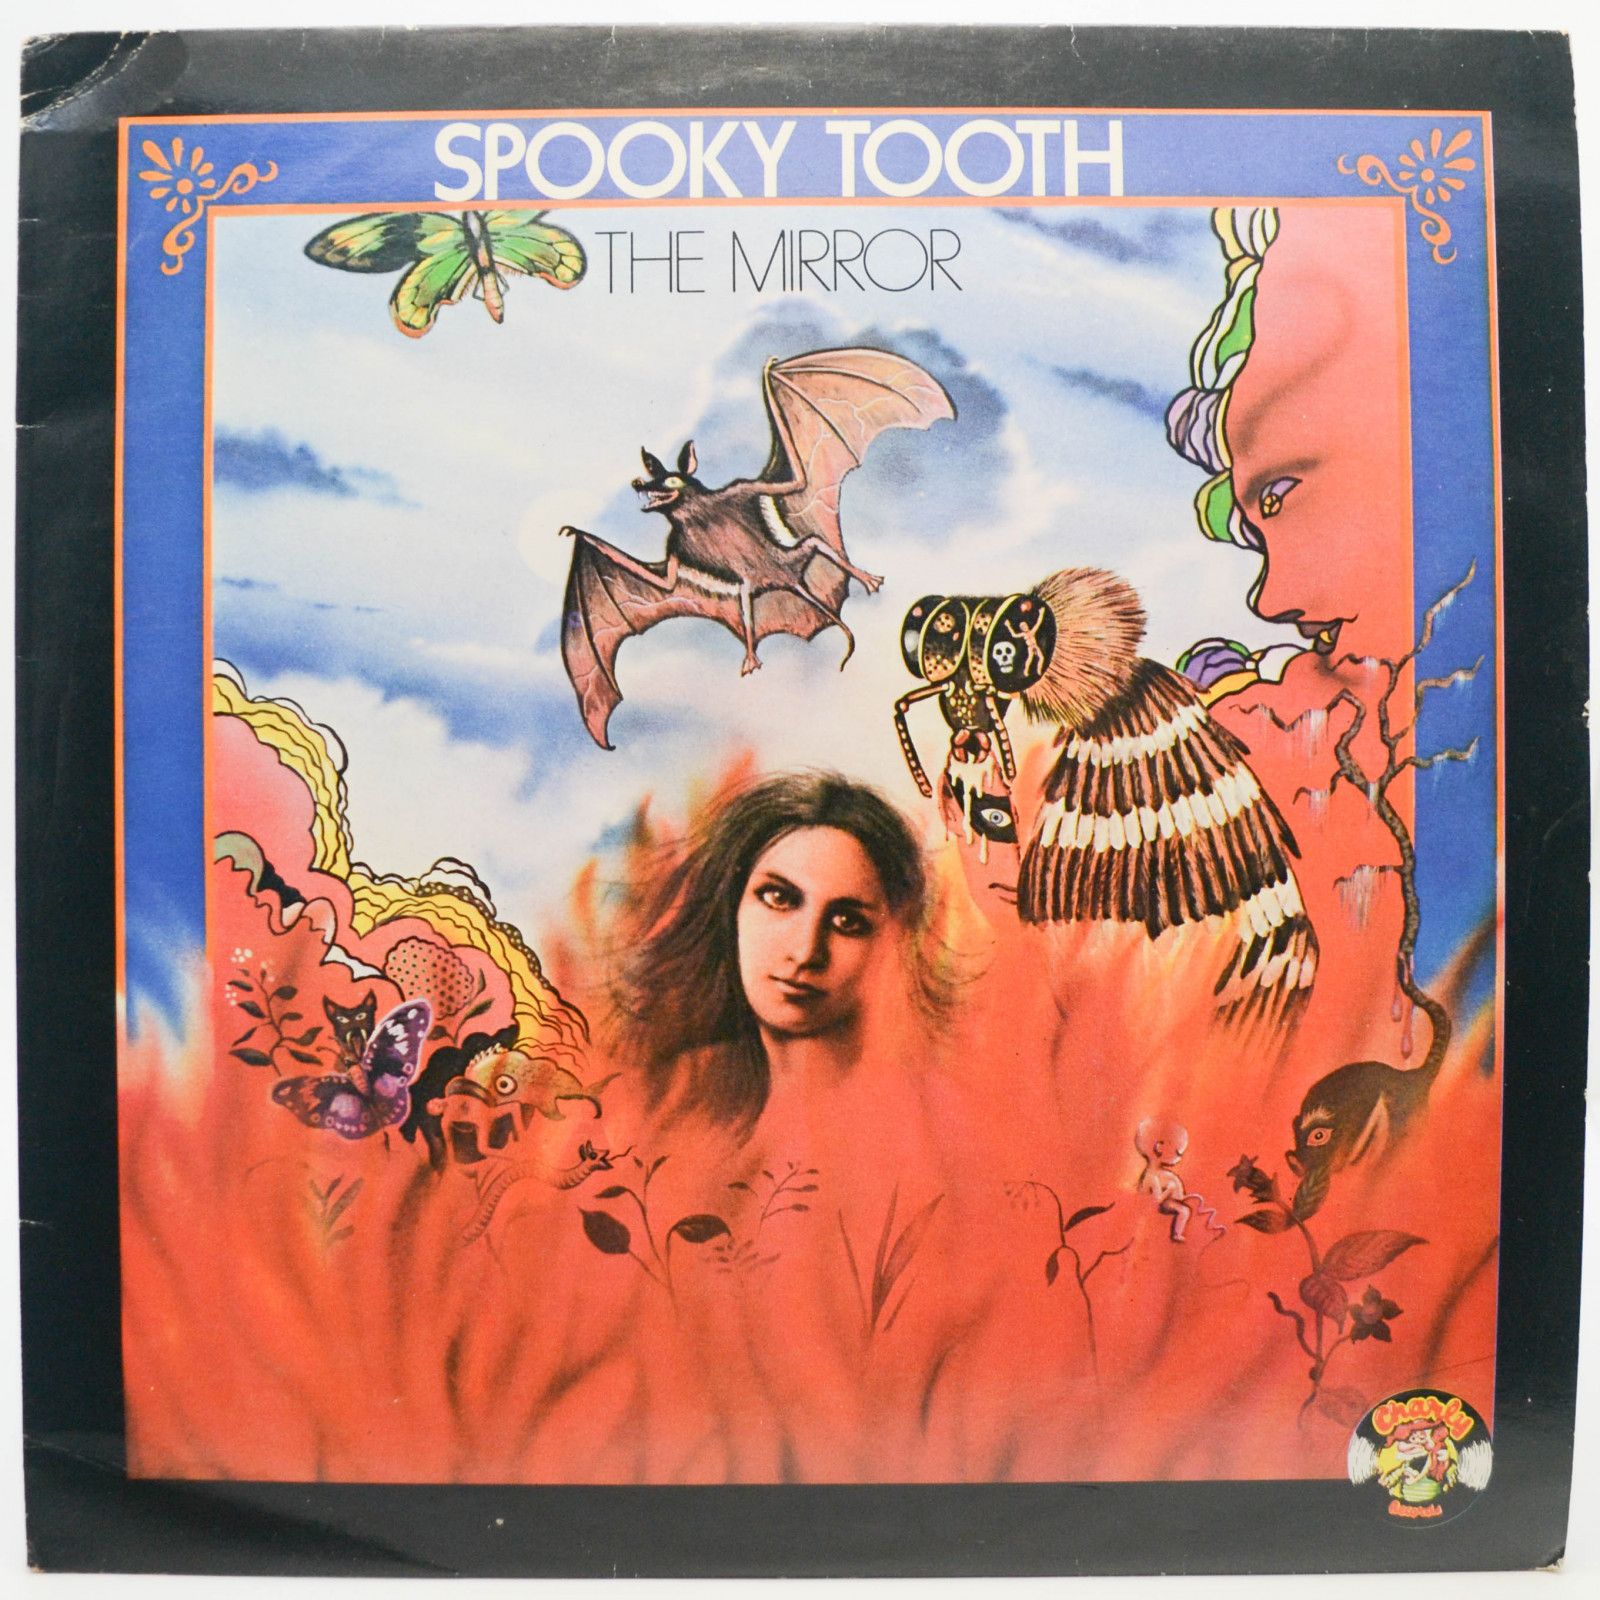 Spooky Tooth — The Mirror (UK), 1974